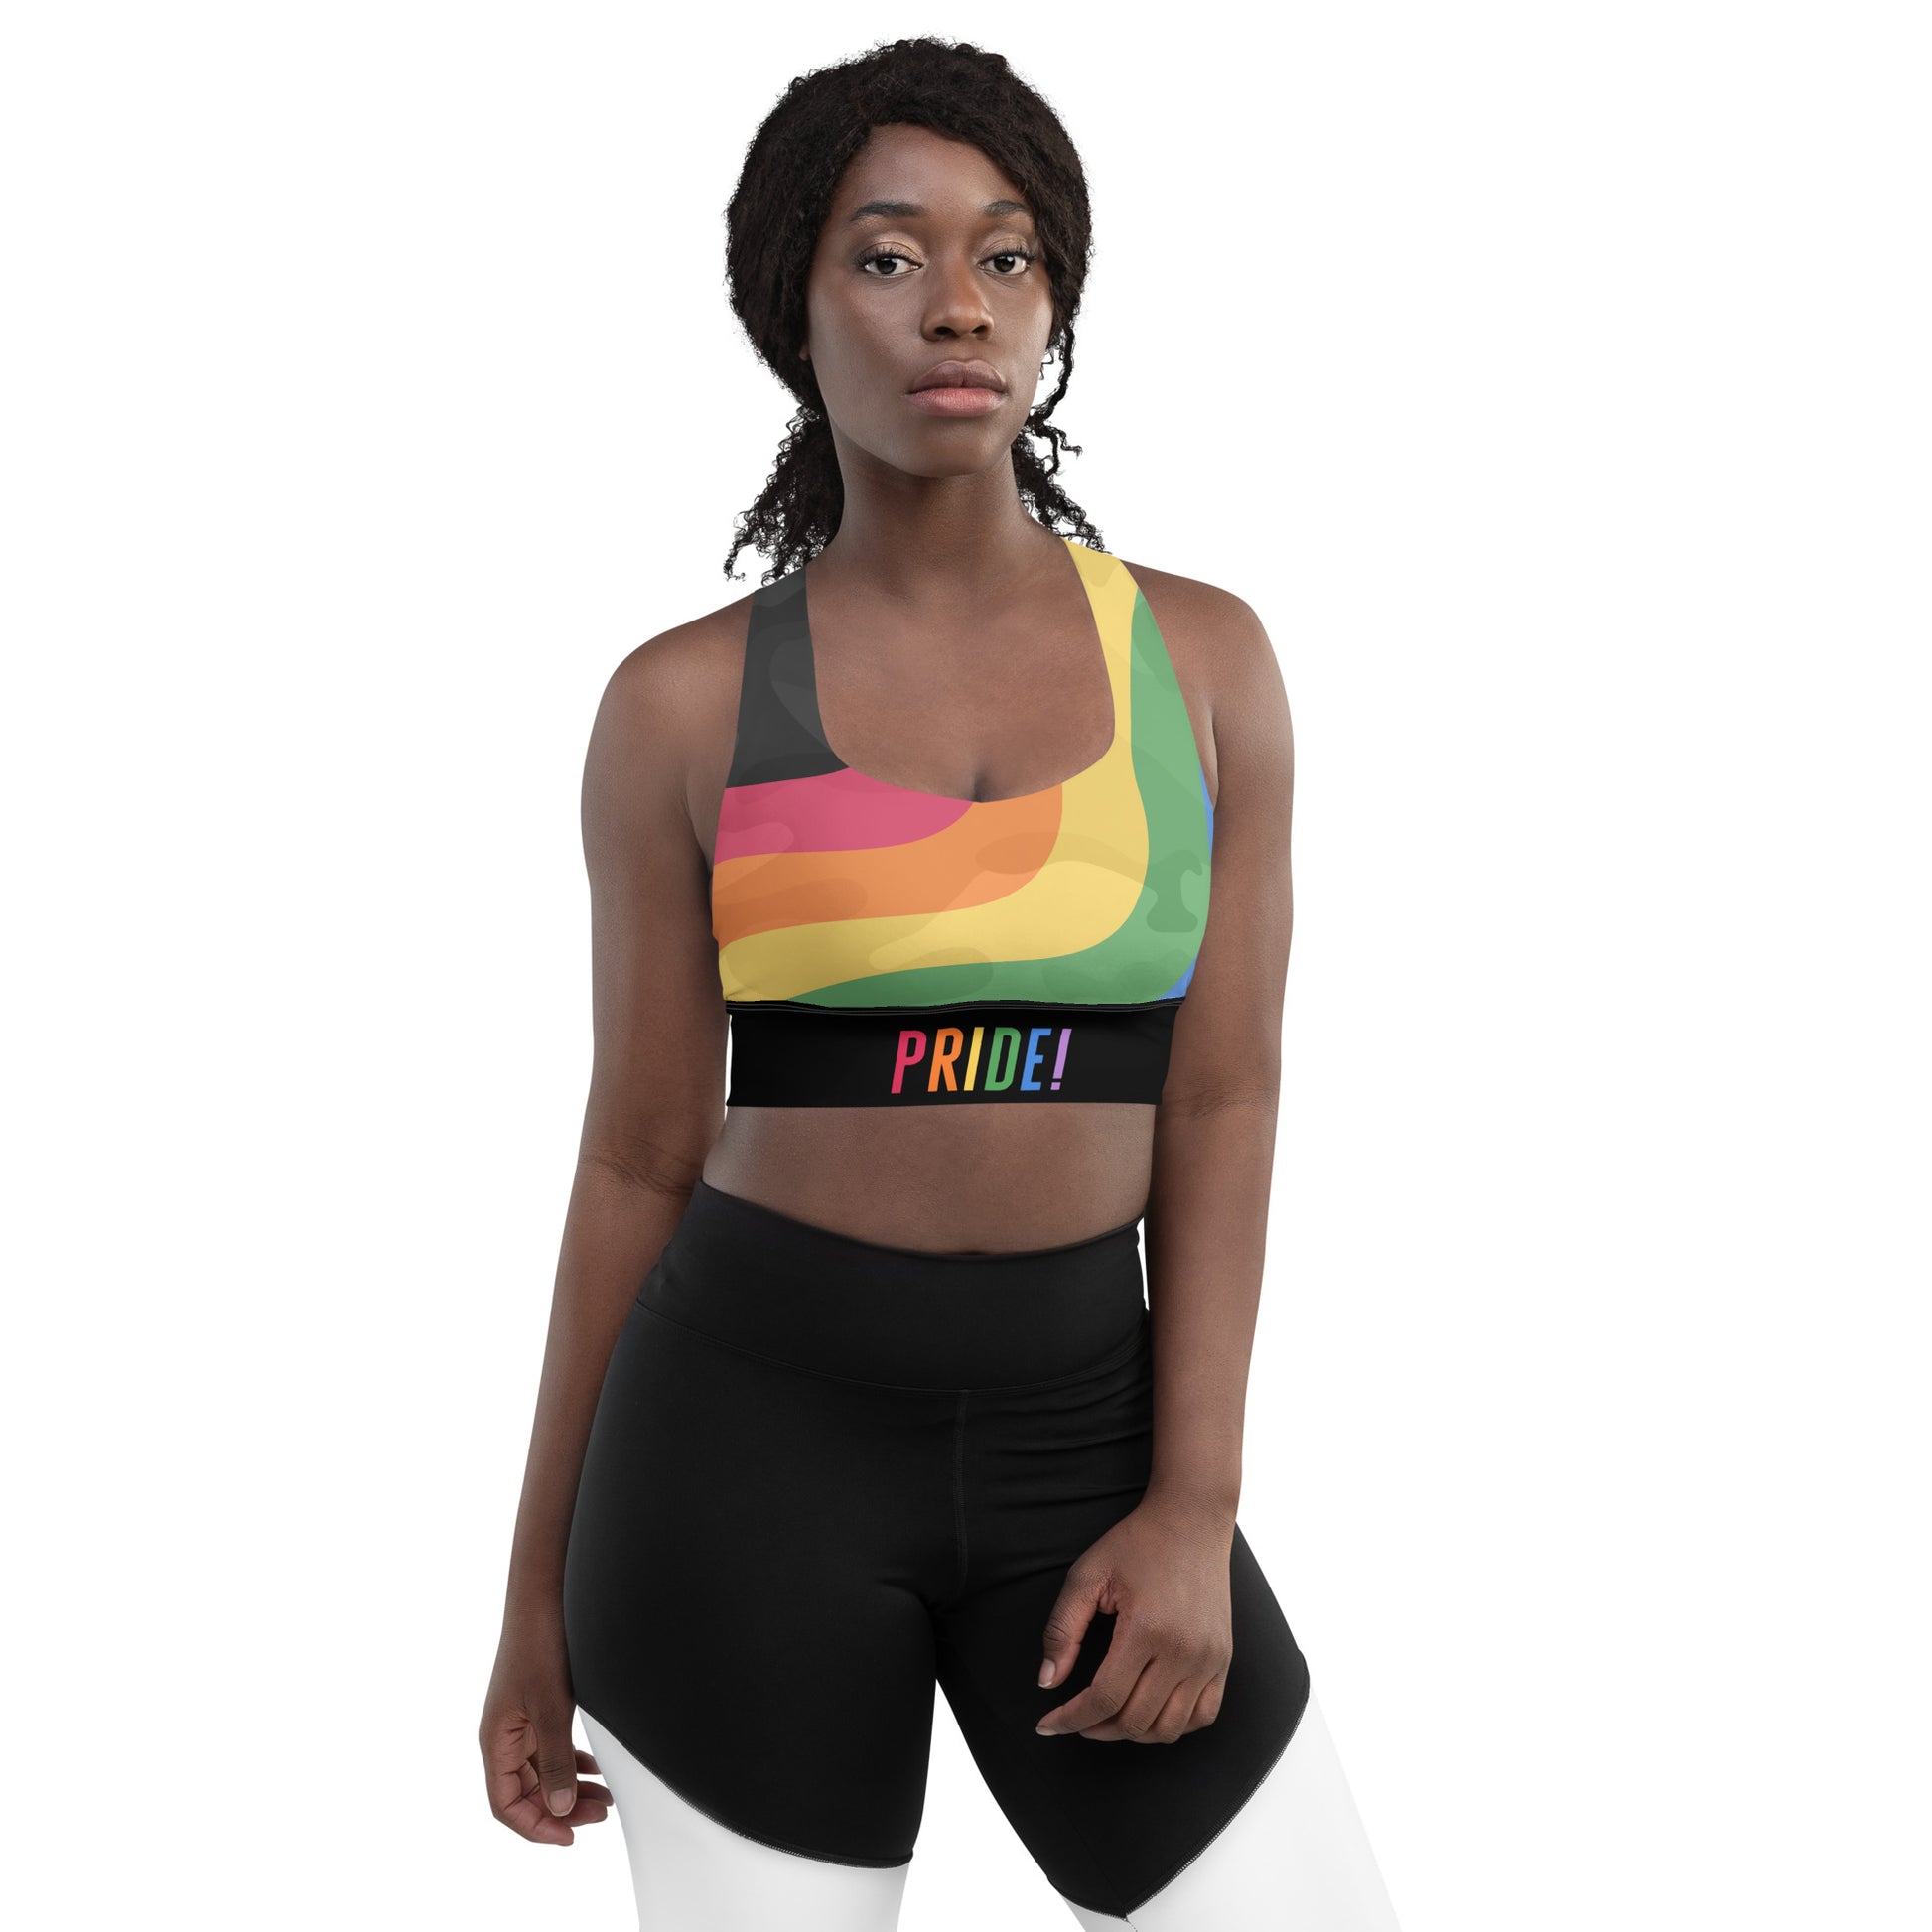 LGBTQ Pride Padded Supportive Sports Bra, Workout, Fitness